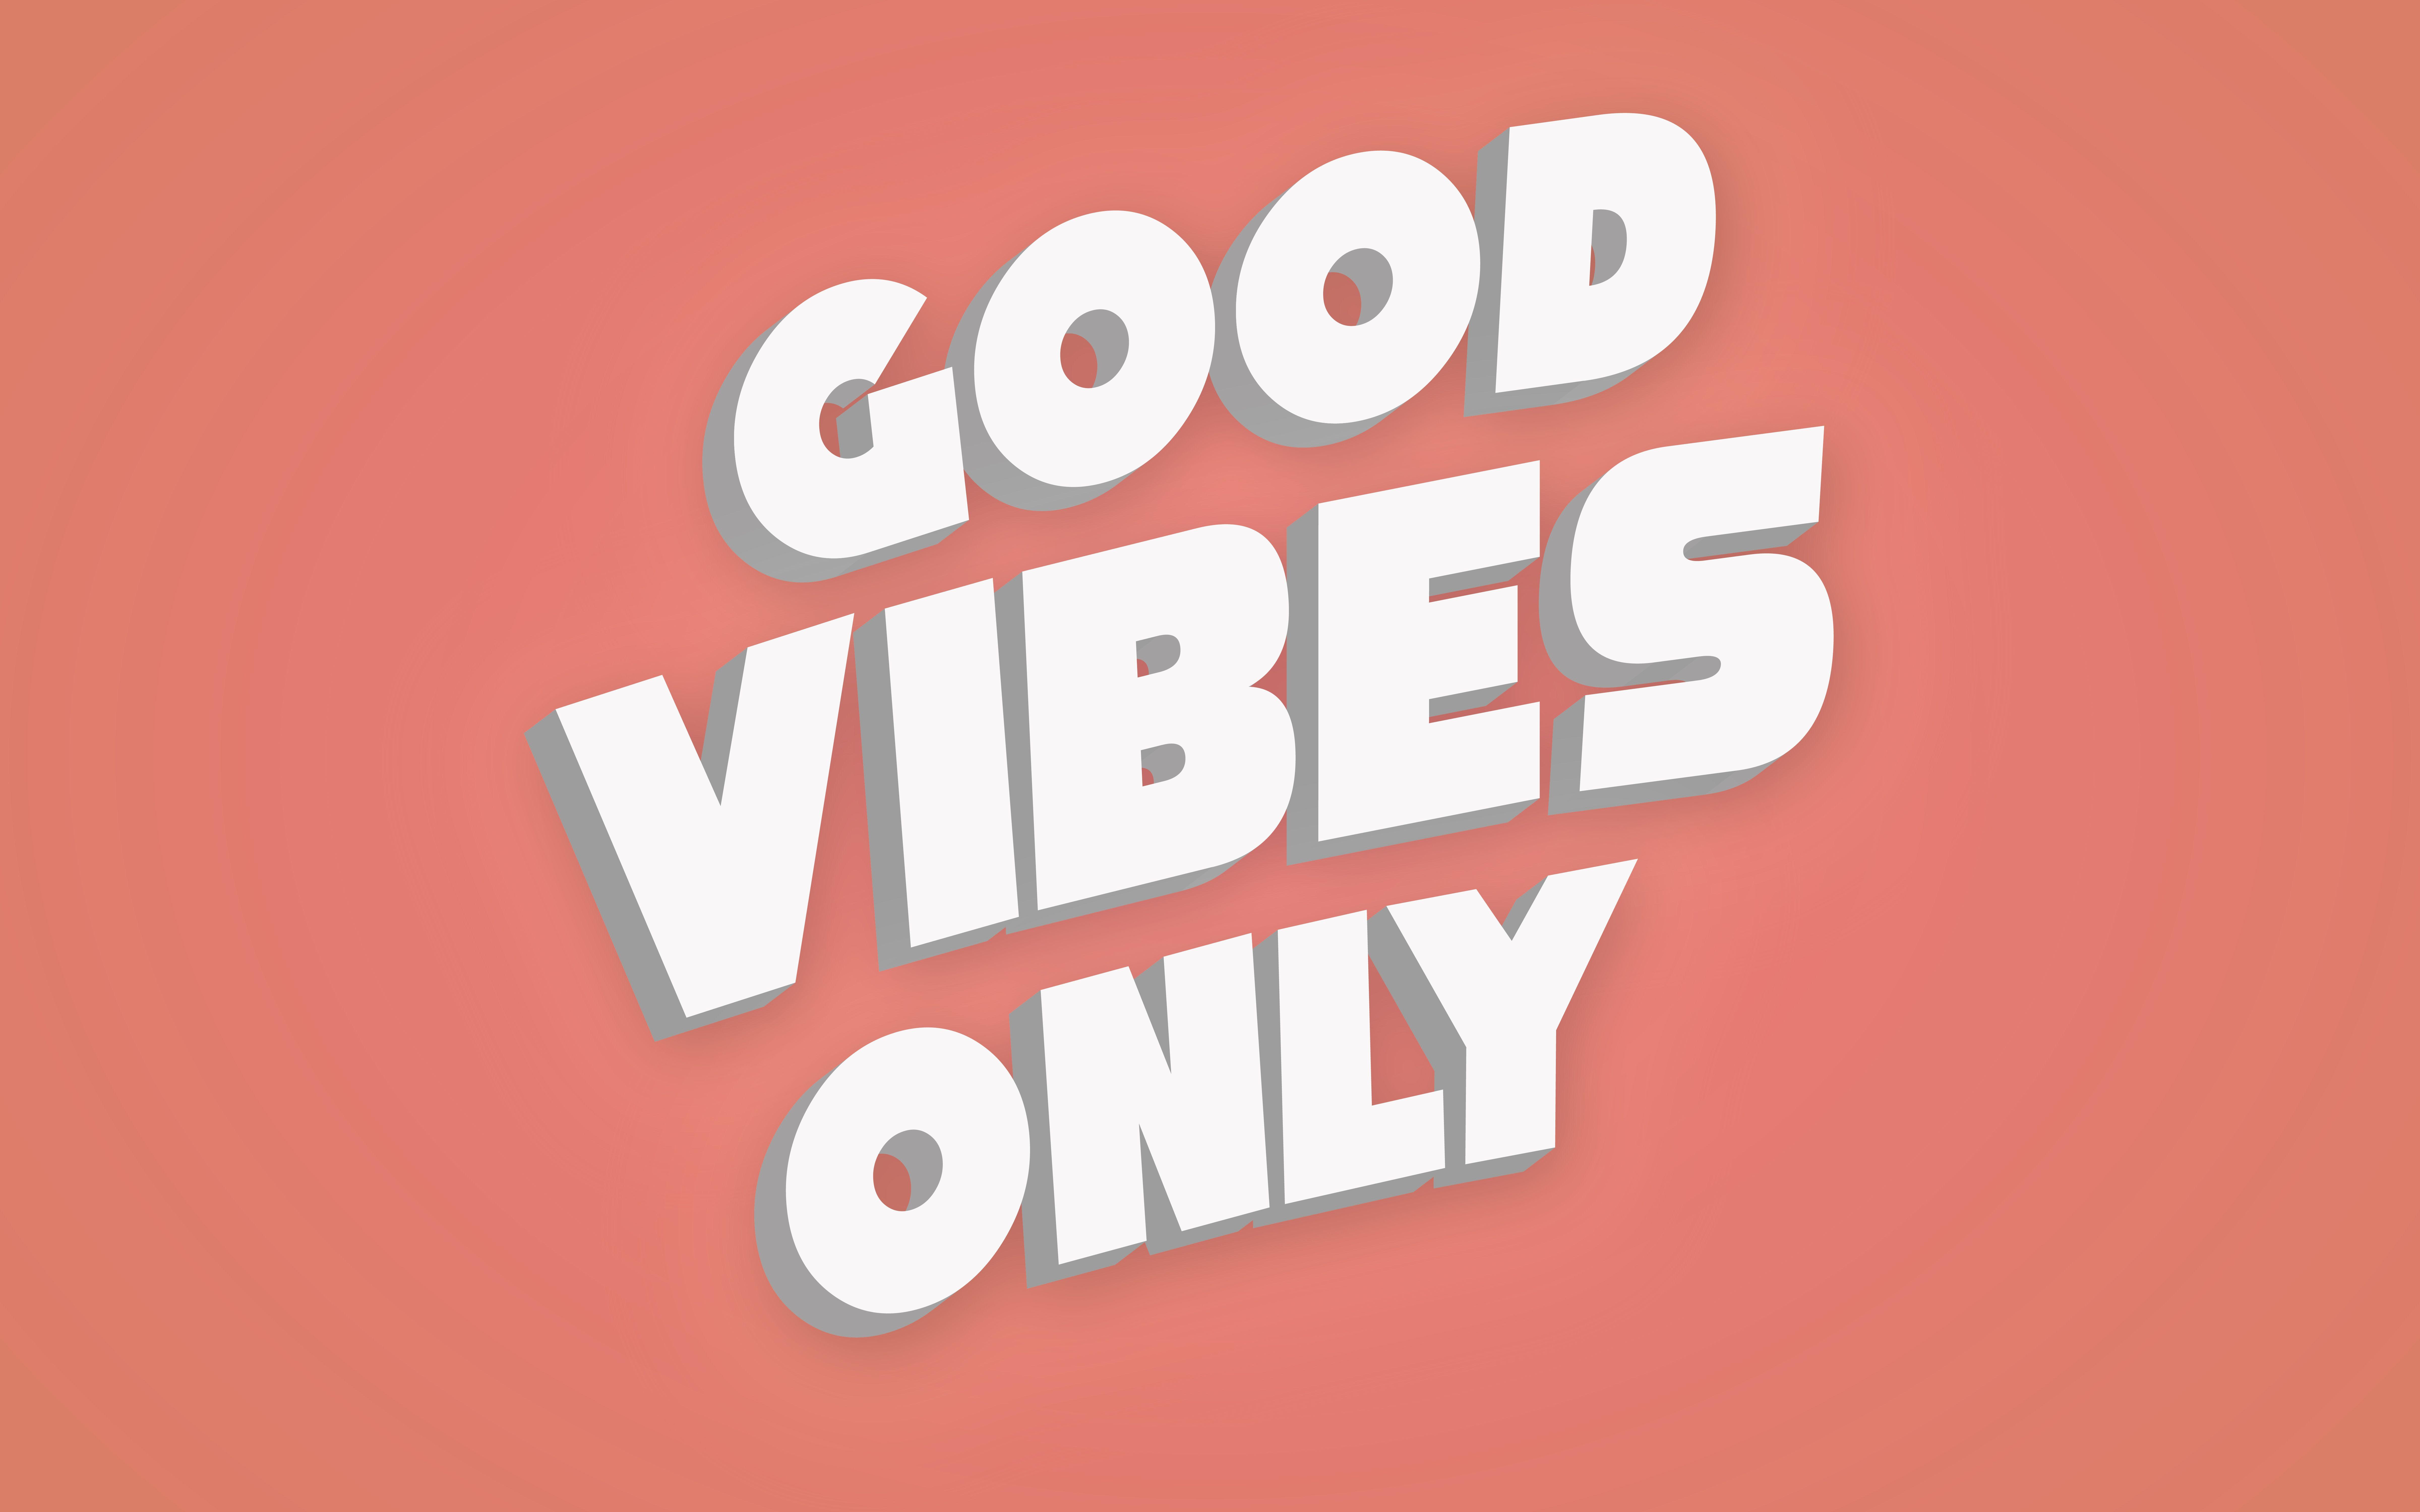 Only positive. Good Vibes only обои. Positive Vibes Wallpaper. Good Vibes only заставка. Обои Гуд Вайб.